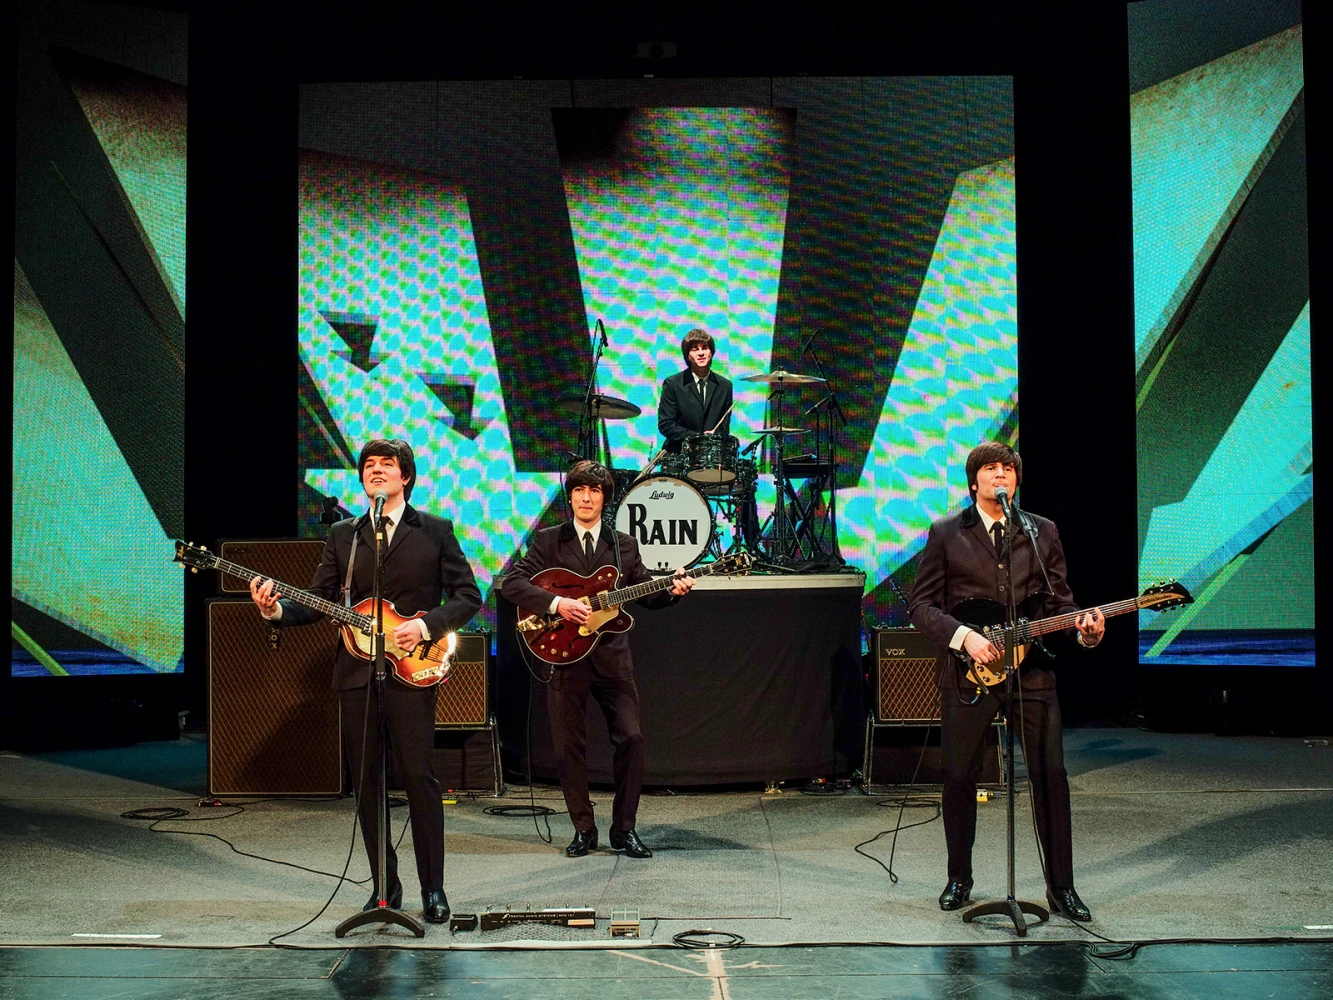 RAIN: A Tribute to The Beatles: What to expect - 2